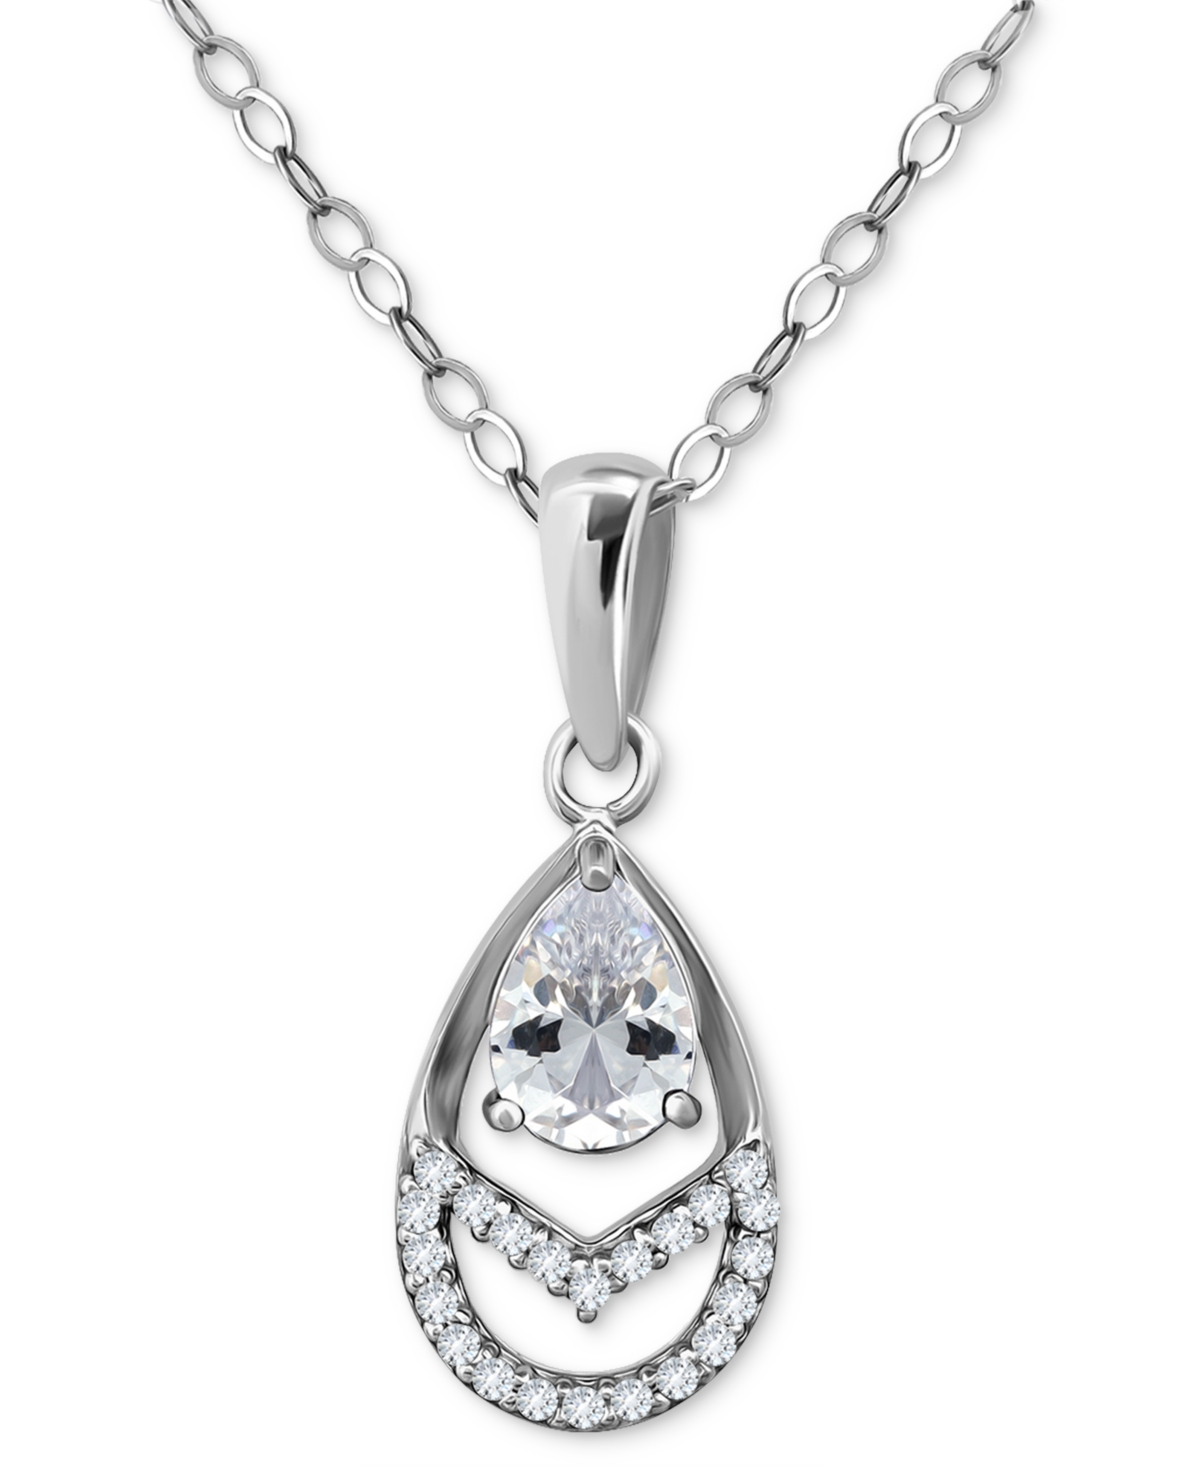 Giani Bernini Cubic Zirconia Pear Teardrop Pendant Necklace In Sterling Silver, 16" + 2" Extender, Created For Mac